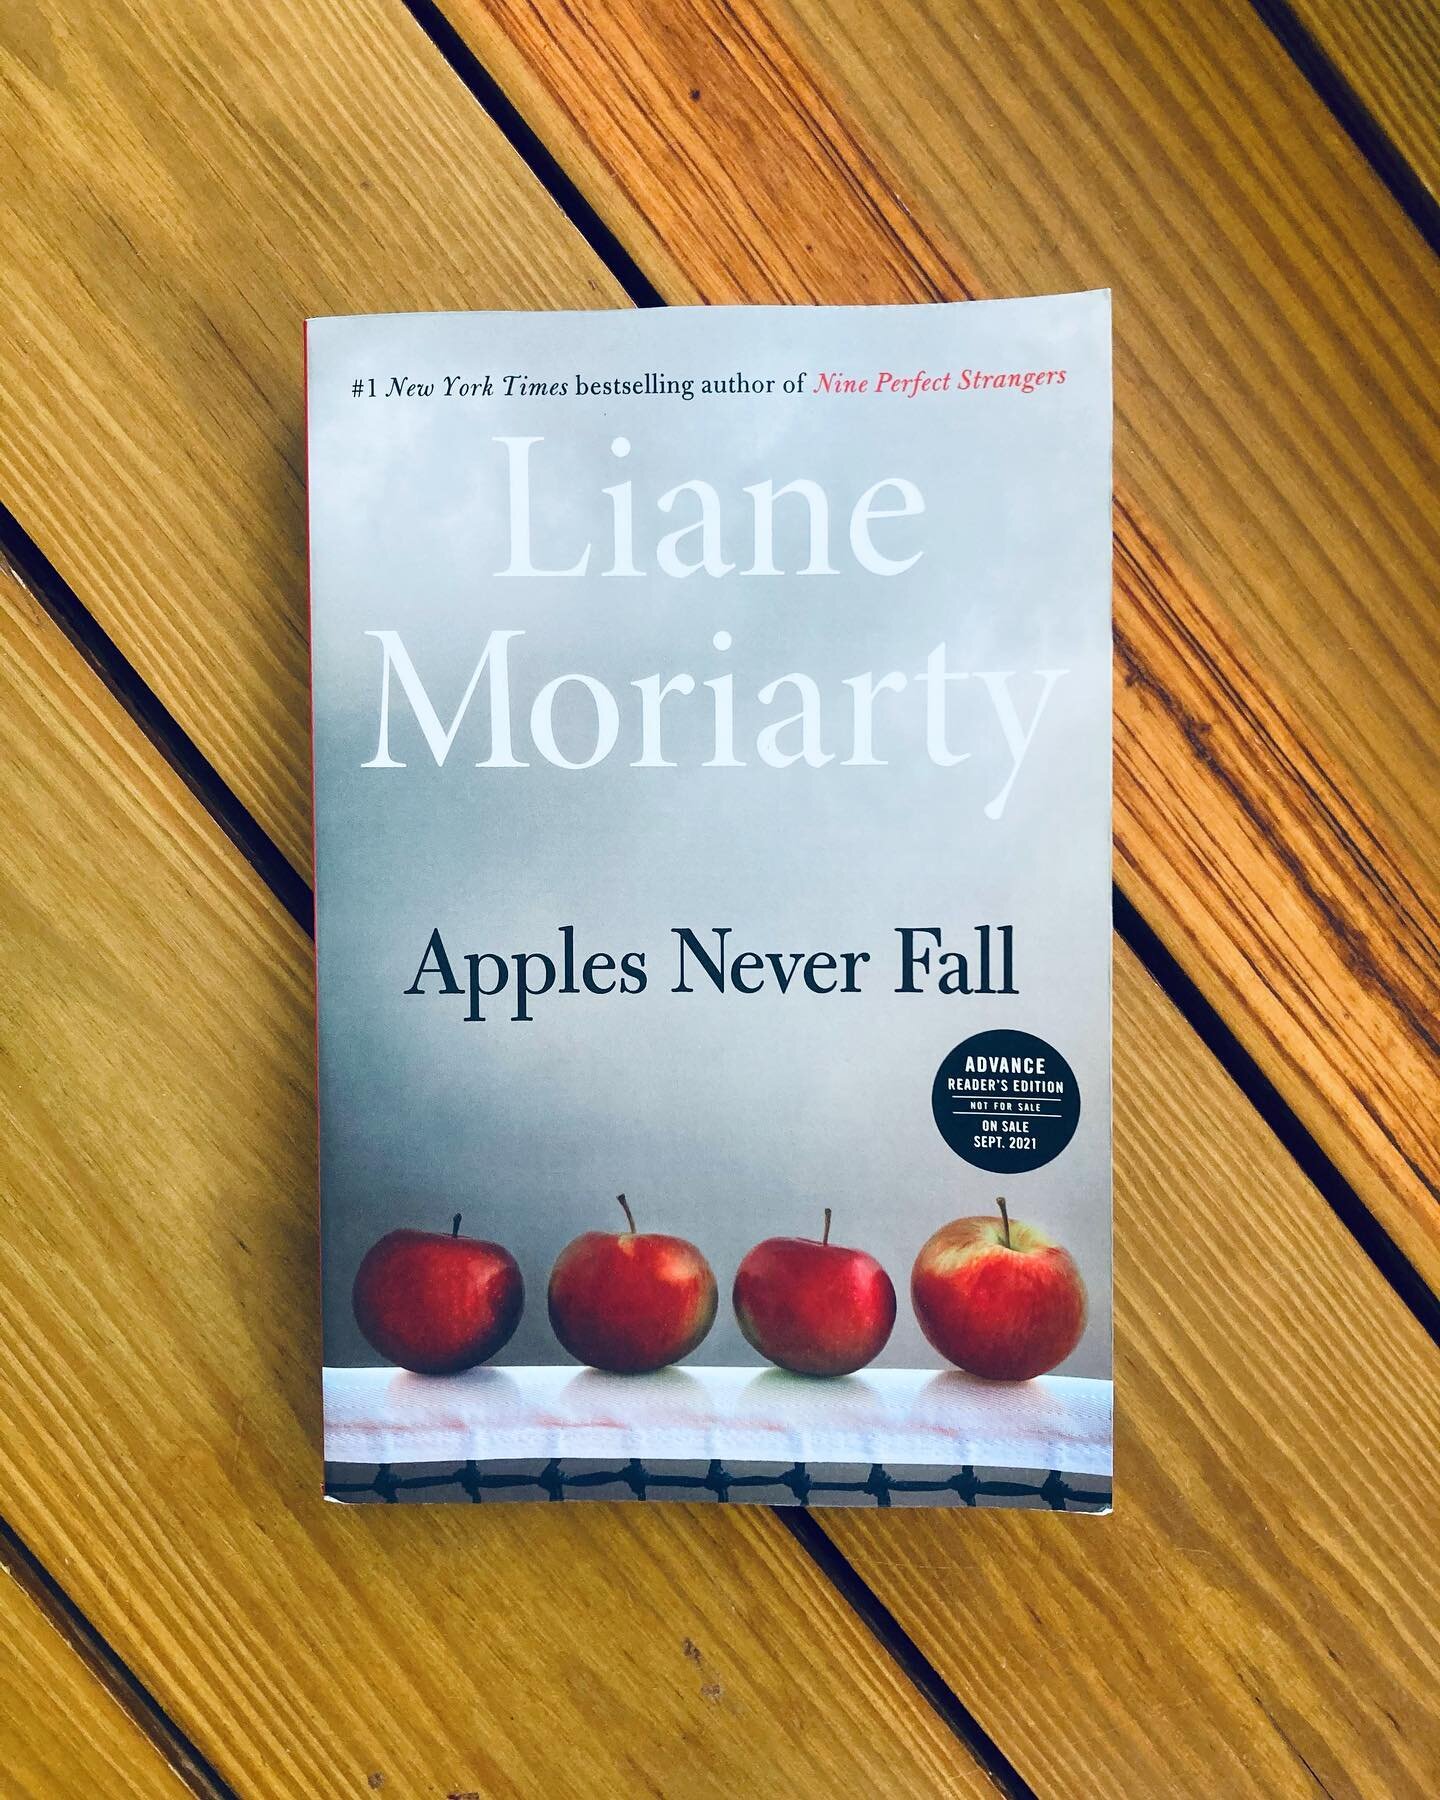 🎁🍎Less than two months until publication! Be one of the first to read Liane Moriarty&rsquo;s upcoming book APPLES NEVER FALL by entering to win an advance copy in our @goodreads giveaway! Link in bio ↗️